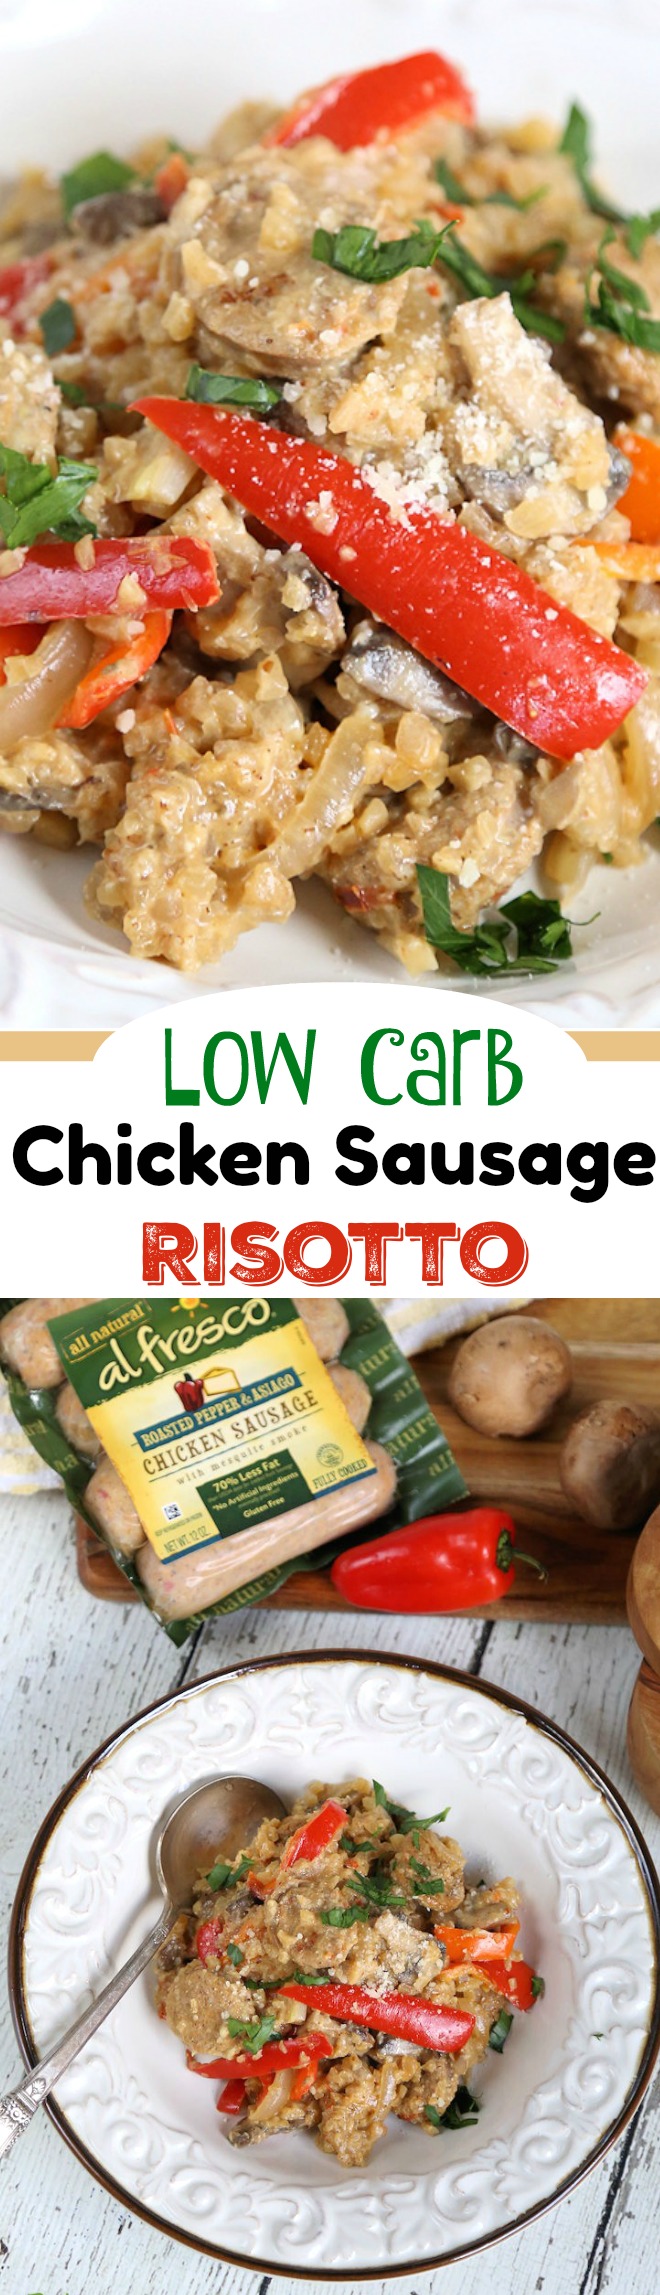 Low Carb Chicken Sausage Risotto Recipe - Easy KETO meal